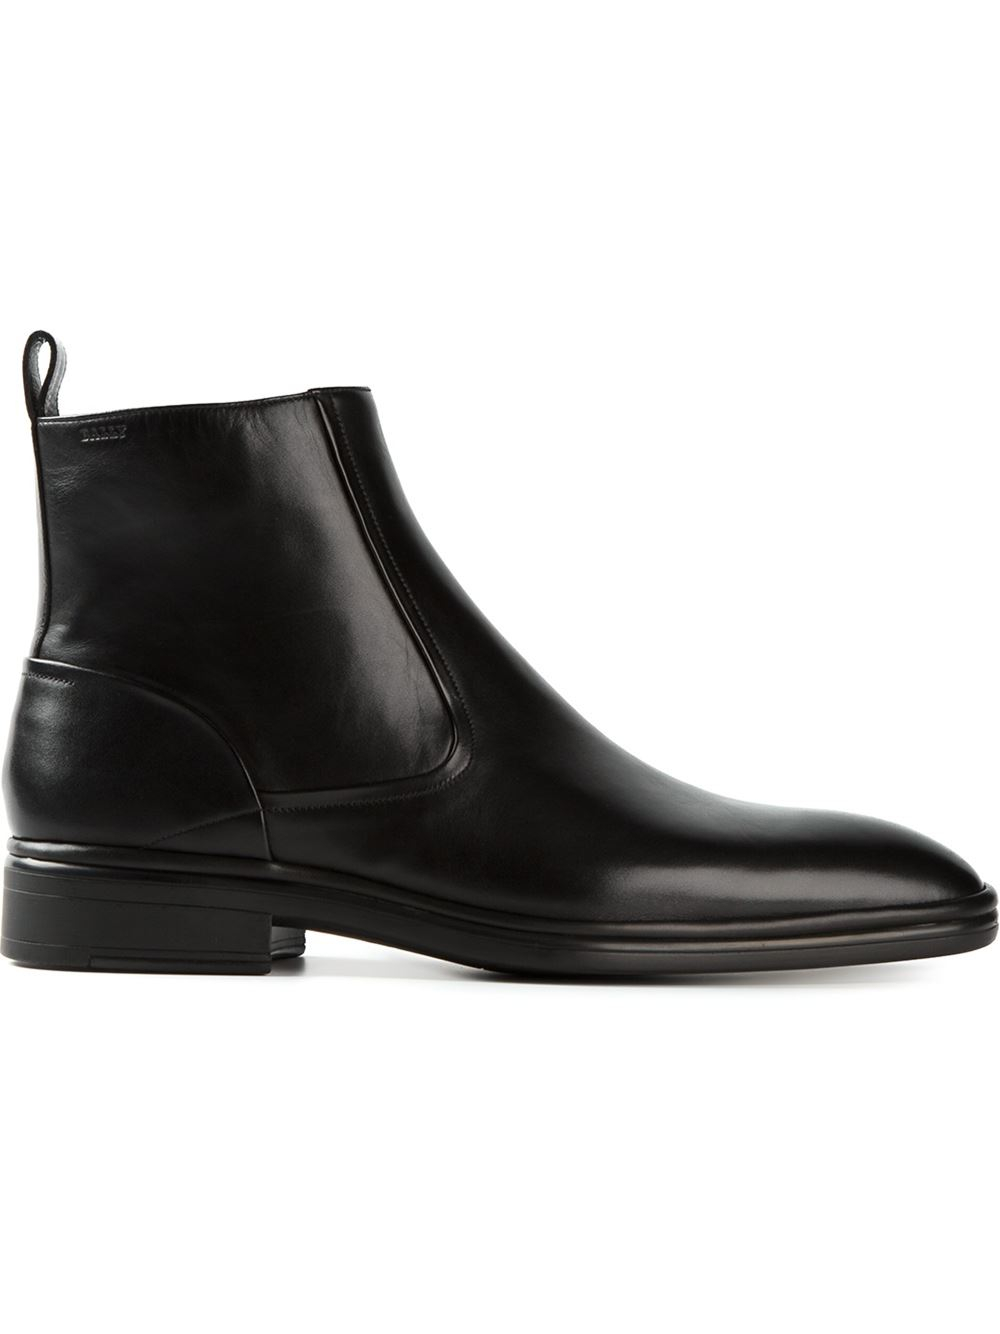 Lyst - Bally Ankle Boots in Black for Men